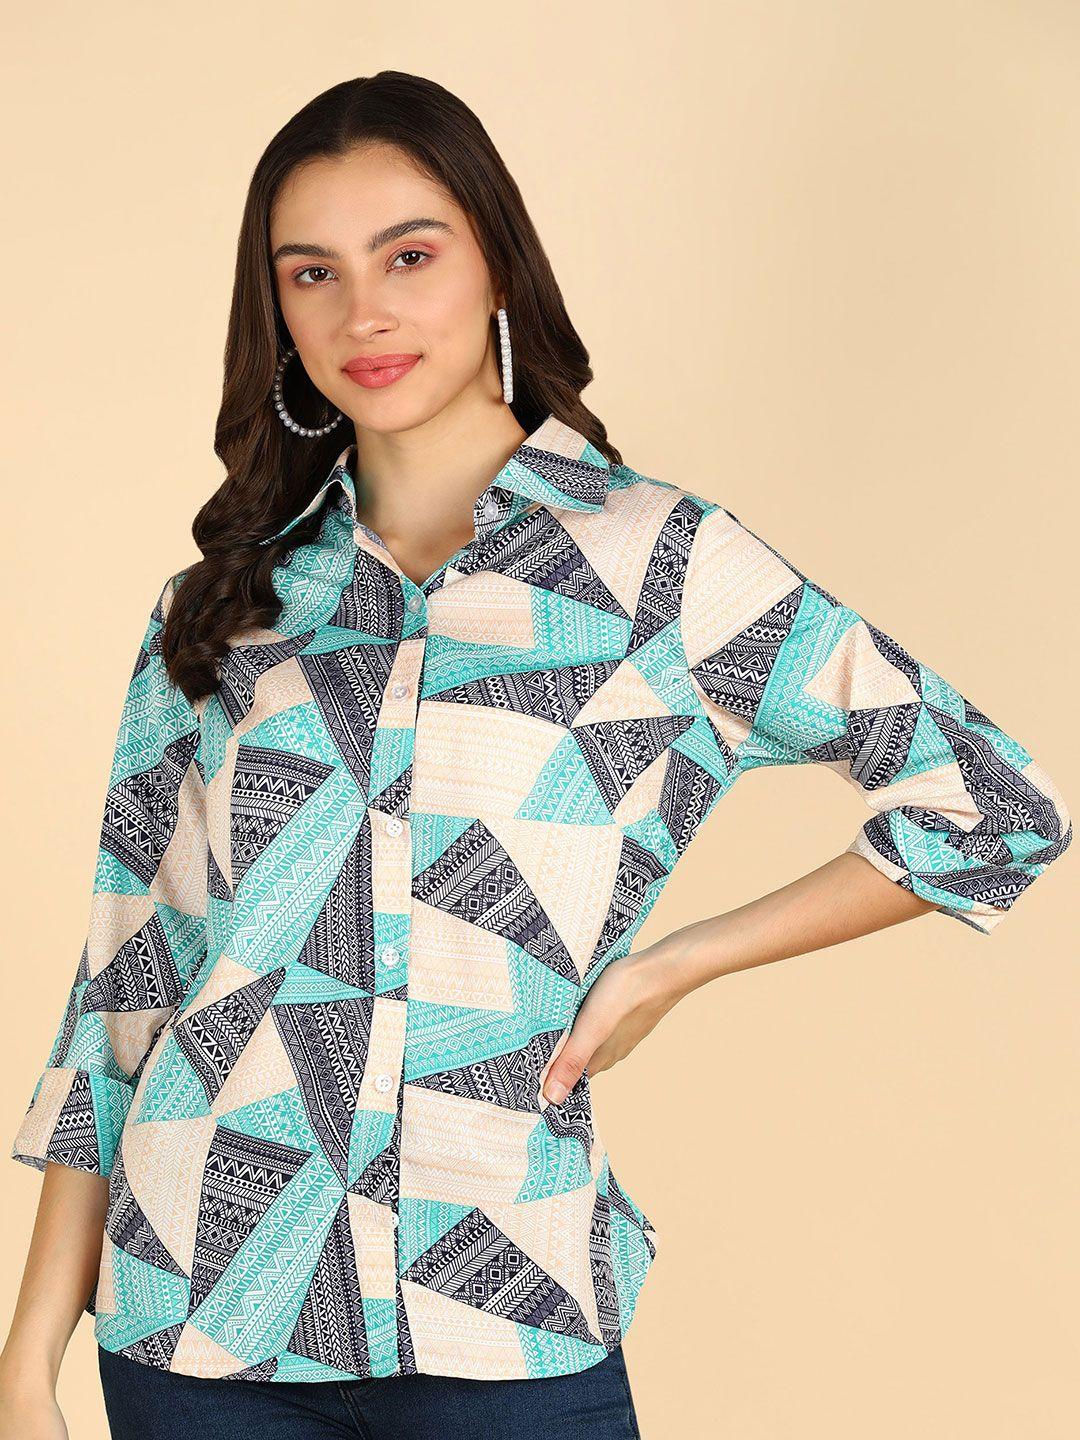 znx clothing classic aztec printed casual shirt